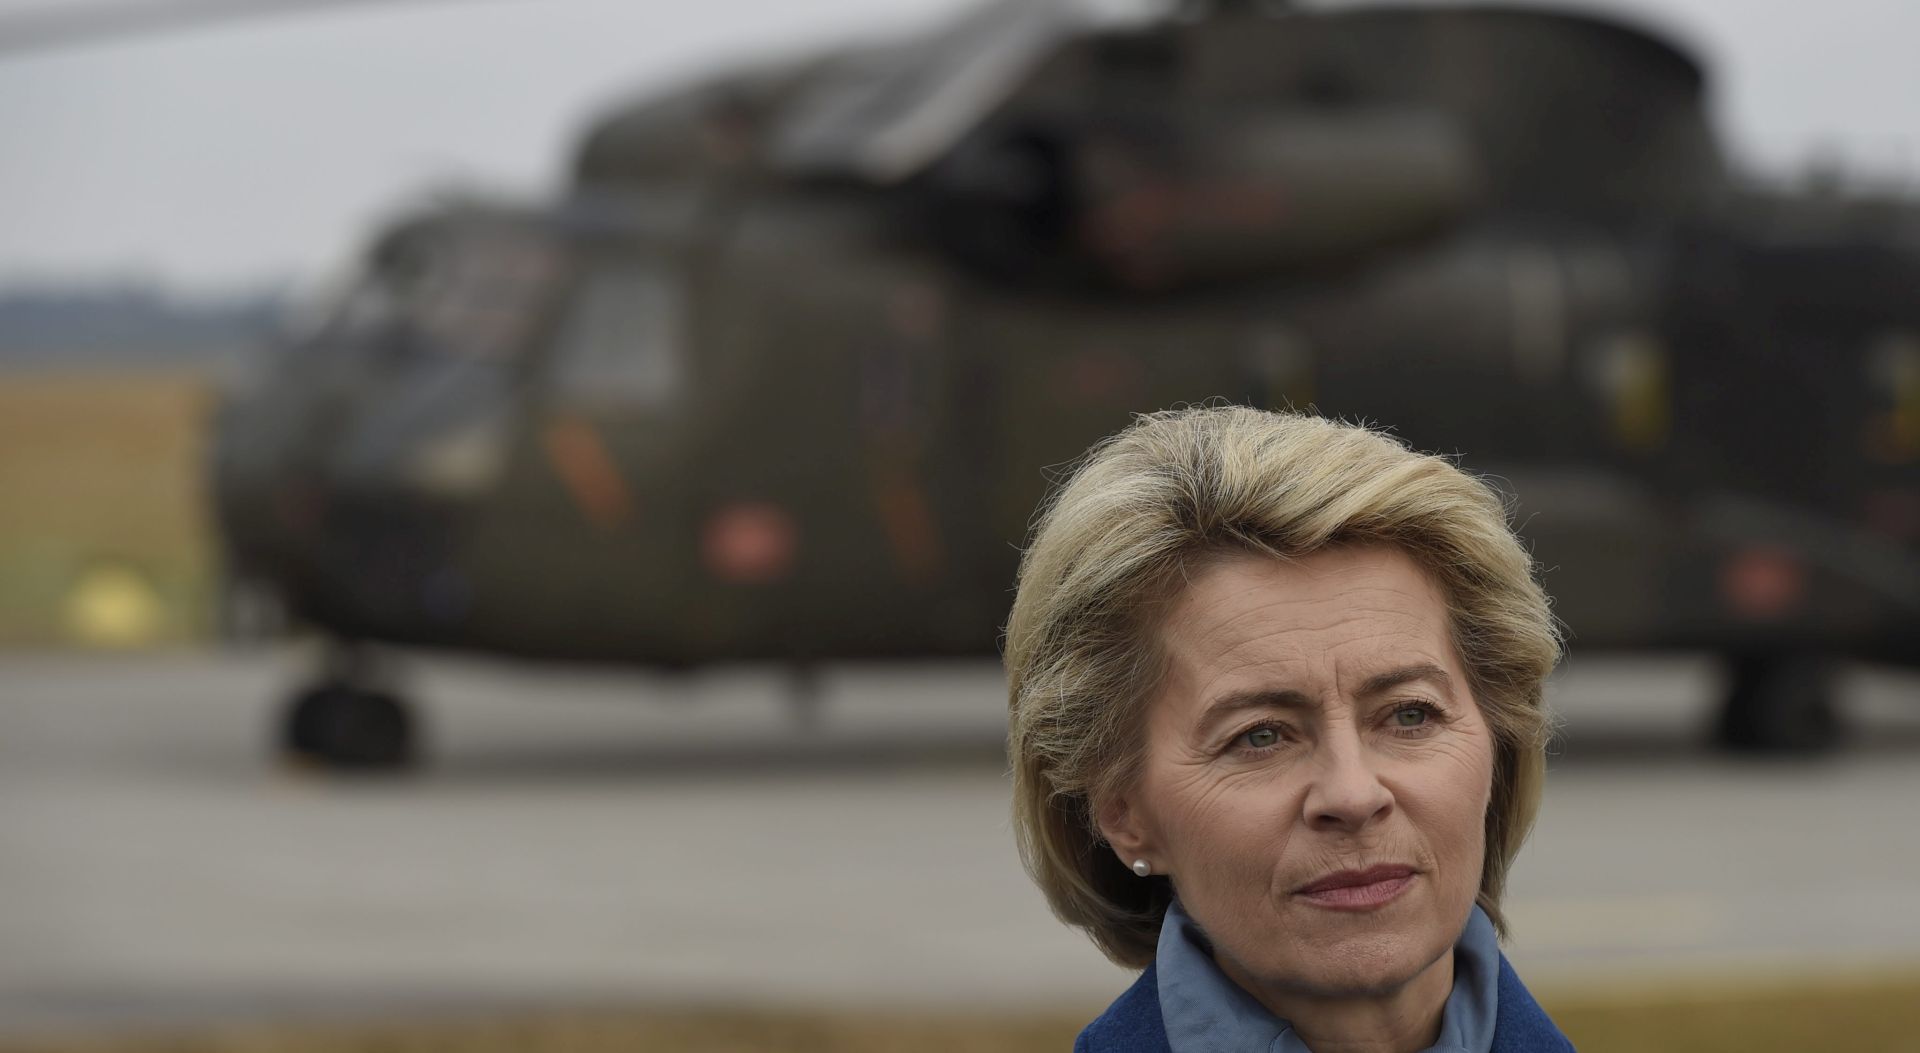 epa05768669 German Defence Minister Ursula von der Leyen stands in front of a CH-53 helicopter during her visit to the Bundeswehr airborne operations training centre in Altenstadt, southern Germany, 03 February 2017. During her visit the Minister was given demonstrations of the german airborne troops' capabilities and talked to soldiers stationed in Altenstadt.  EPA/PHILIPP GUELLAND